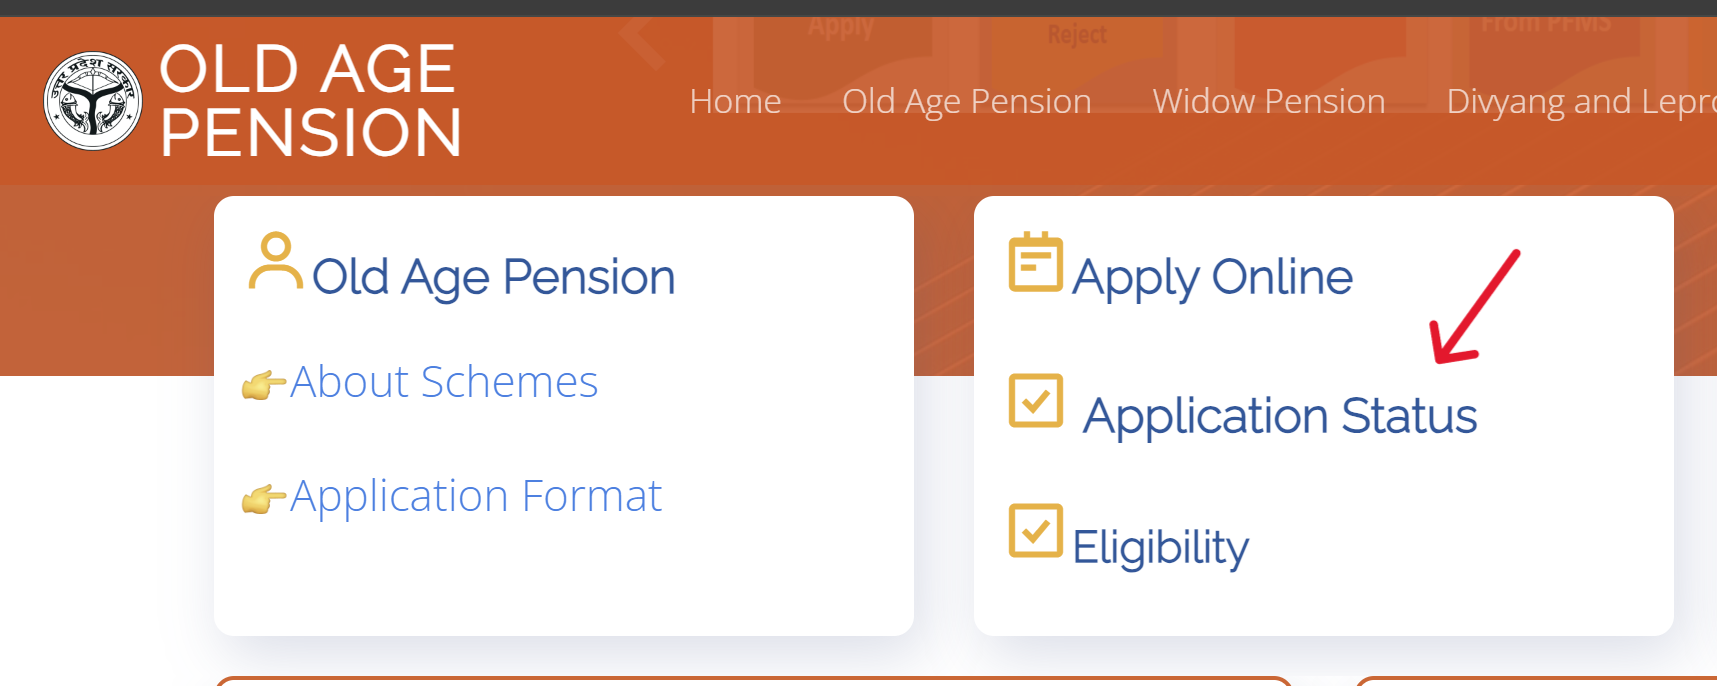 UP Widow Pension Application Status